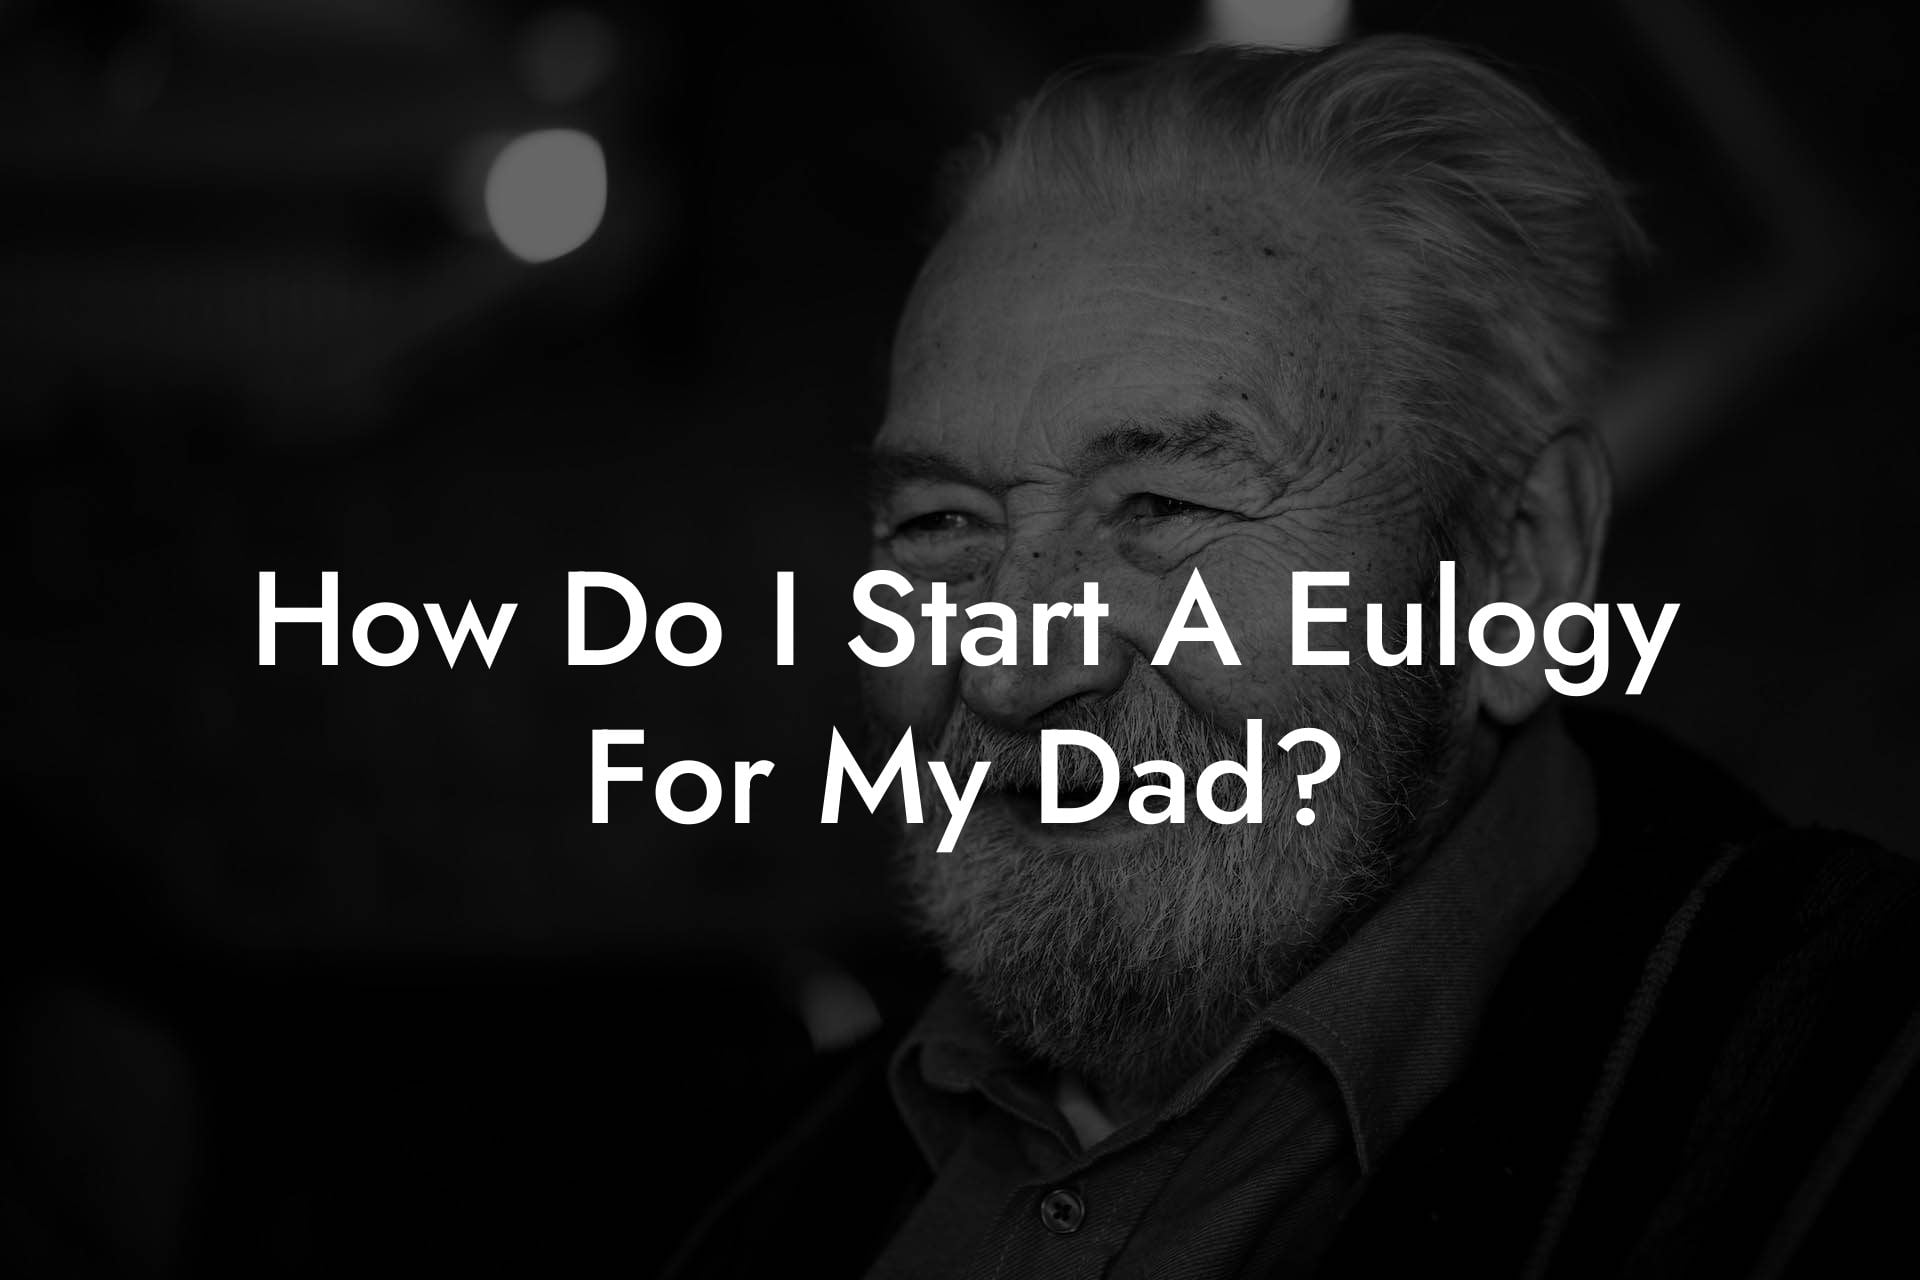 How Do I Start A Eulogy For My Dad?